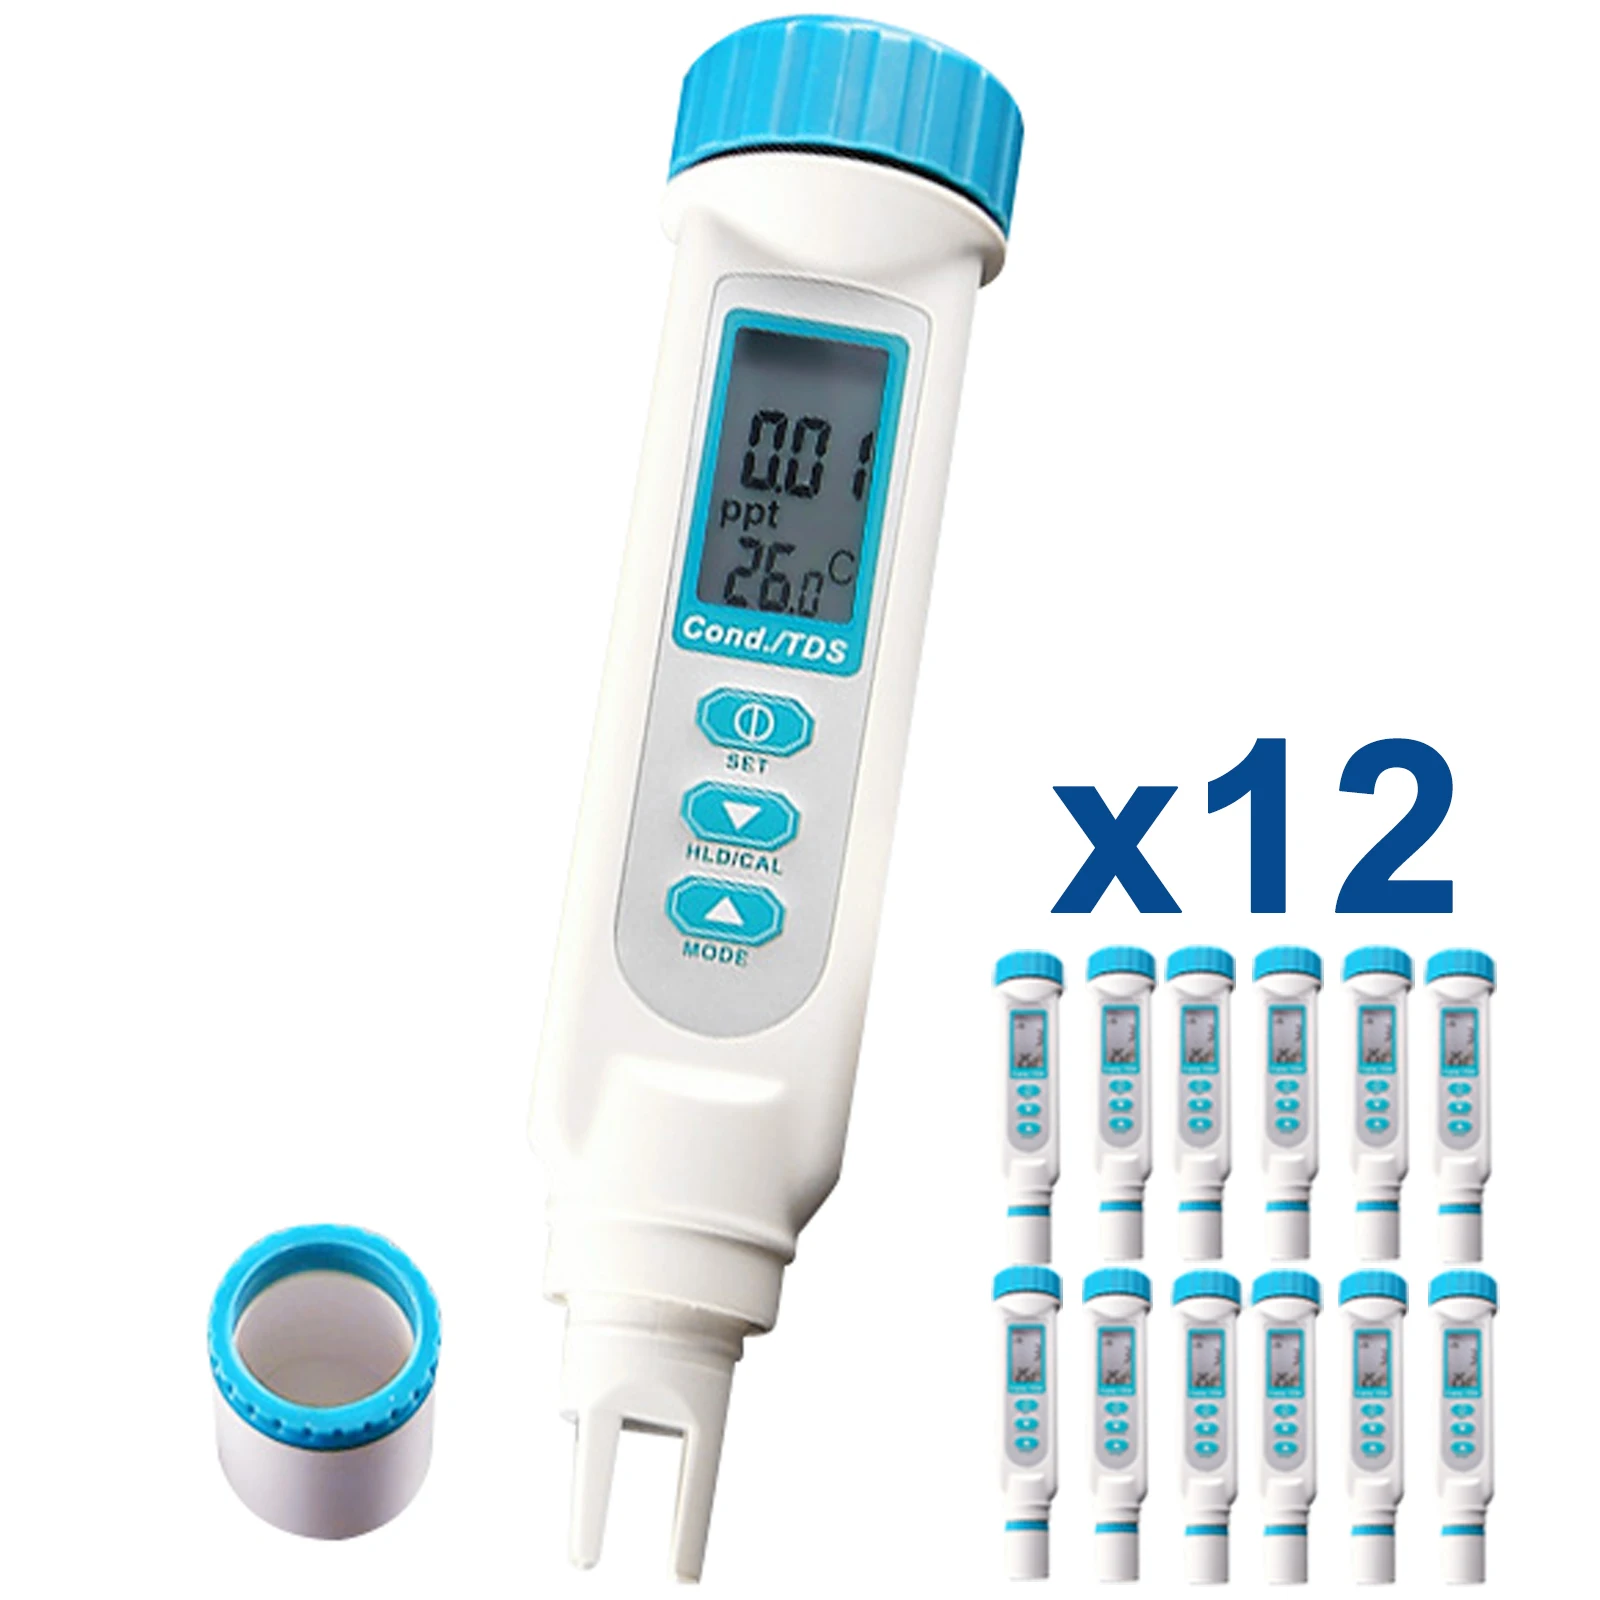 

12 pieces x Digital 3-in-1 Conductivity TDS Meter ppm ppt uS mS C/F Pool Spa Water Treatment Pen-type Tester